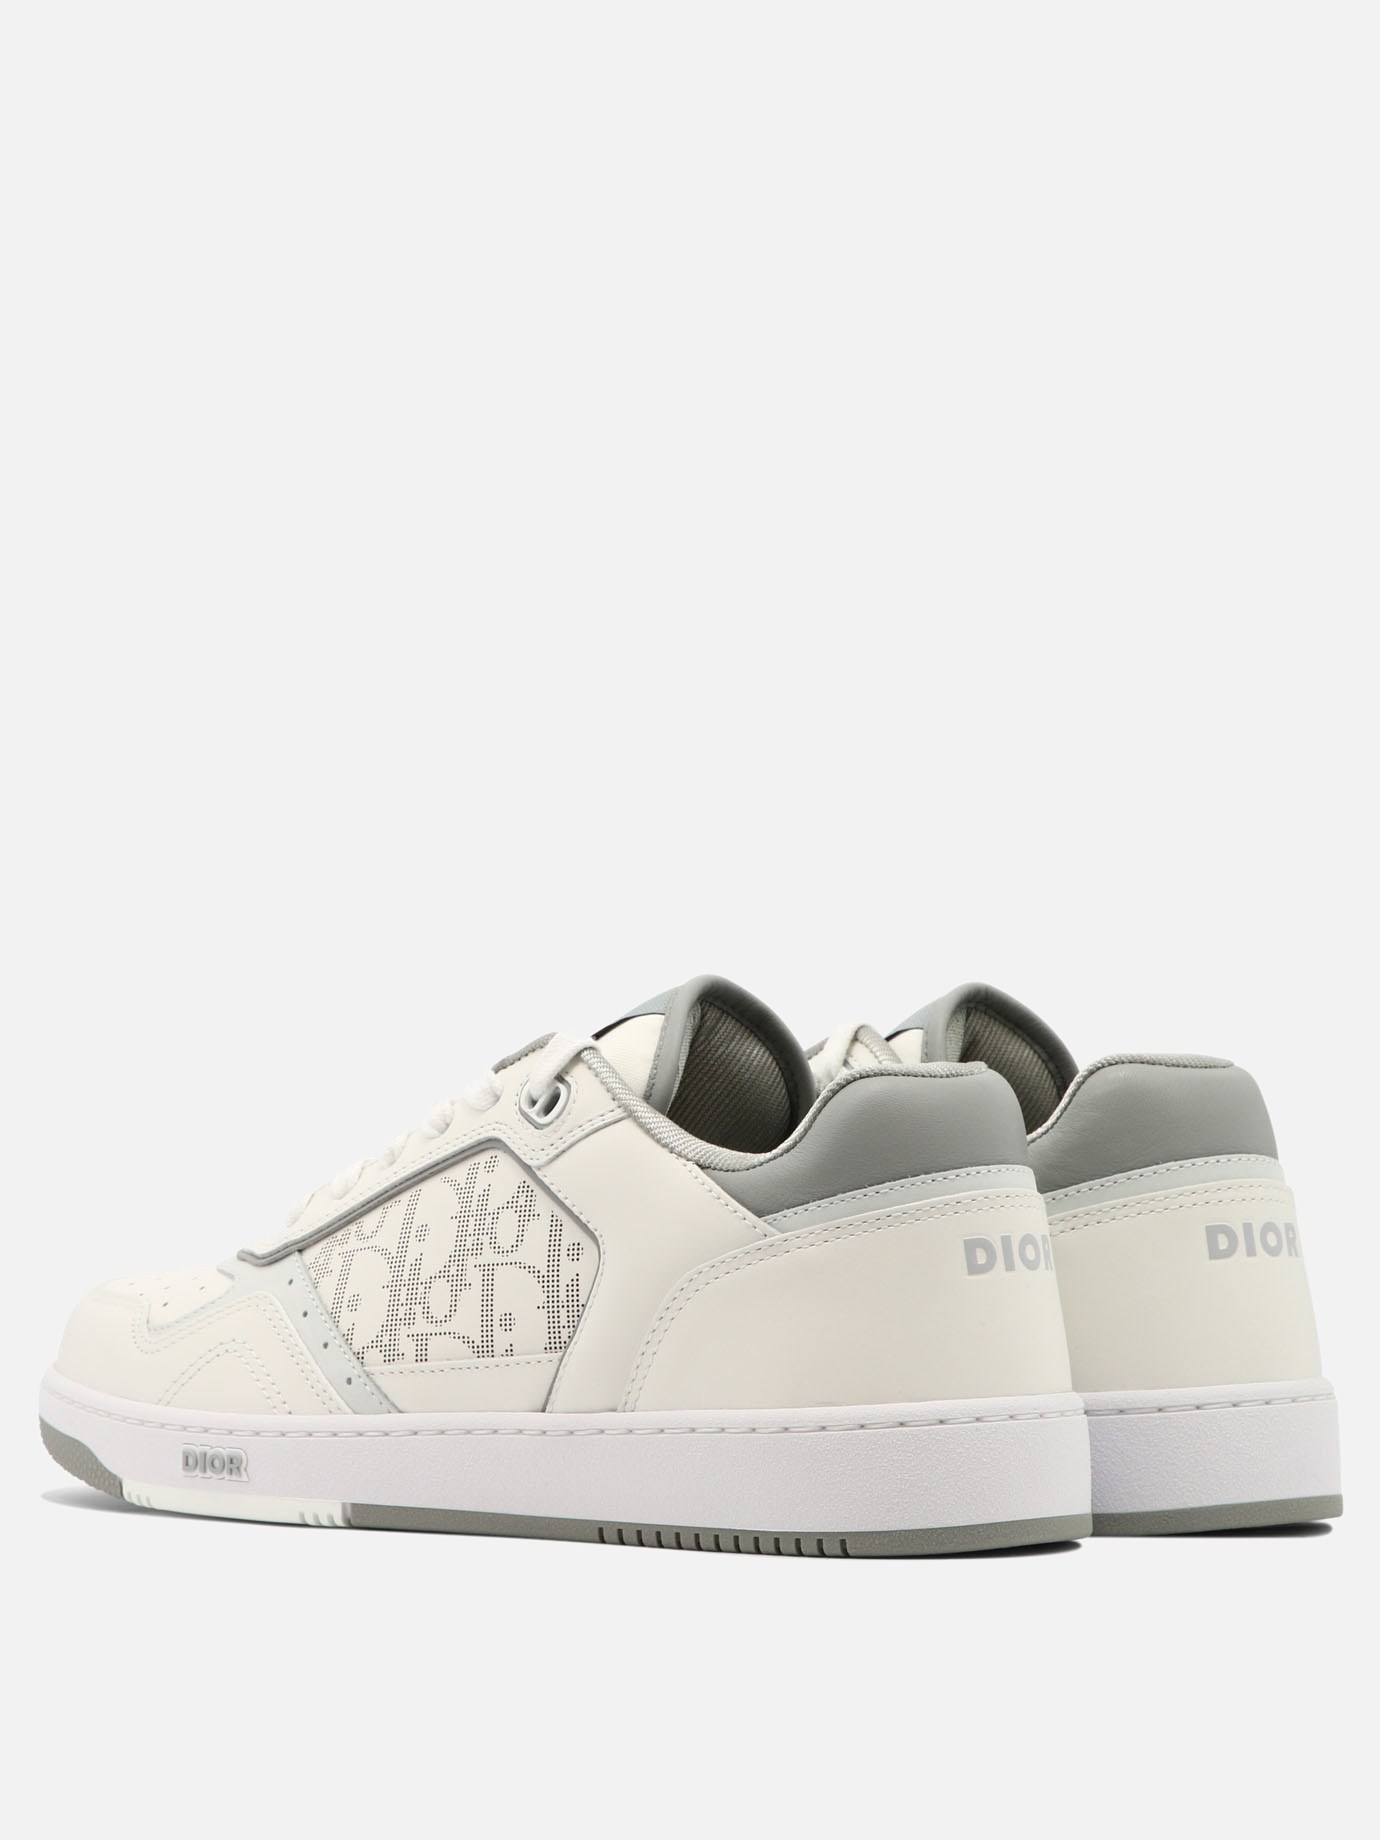 Sneaker  B27  by Dior